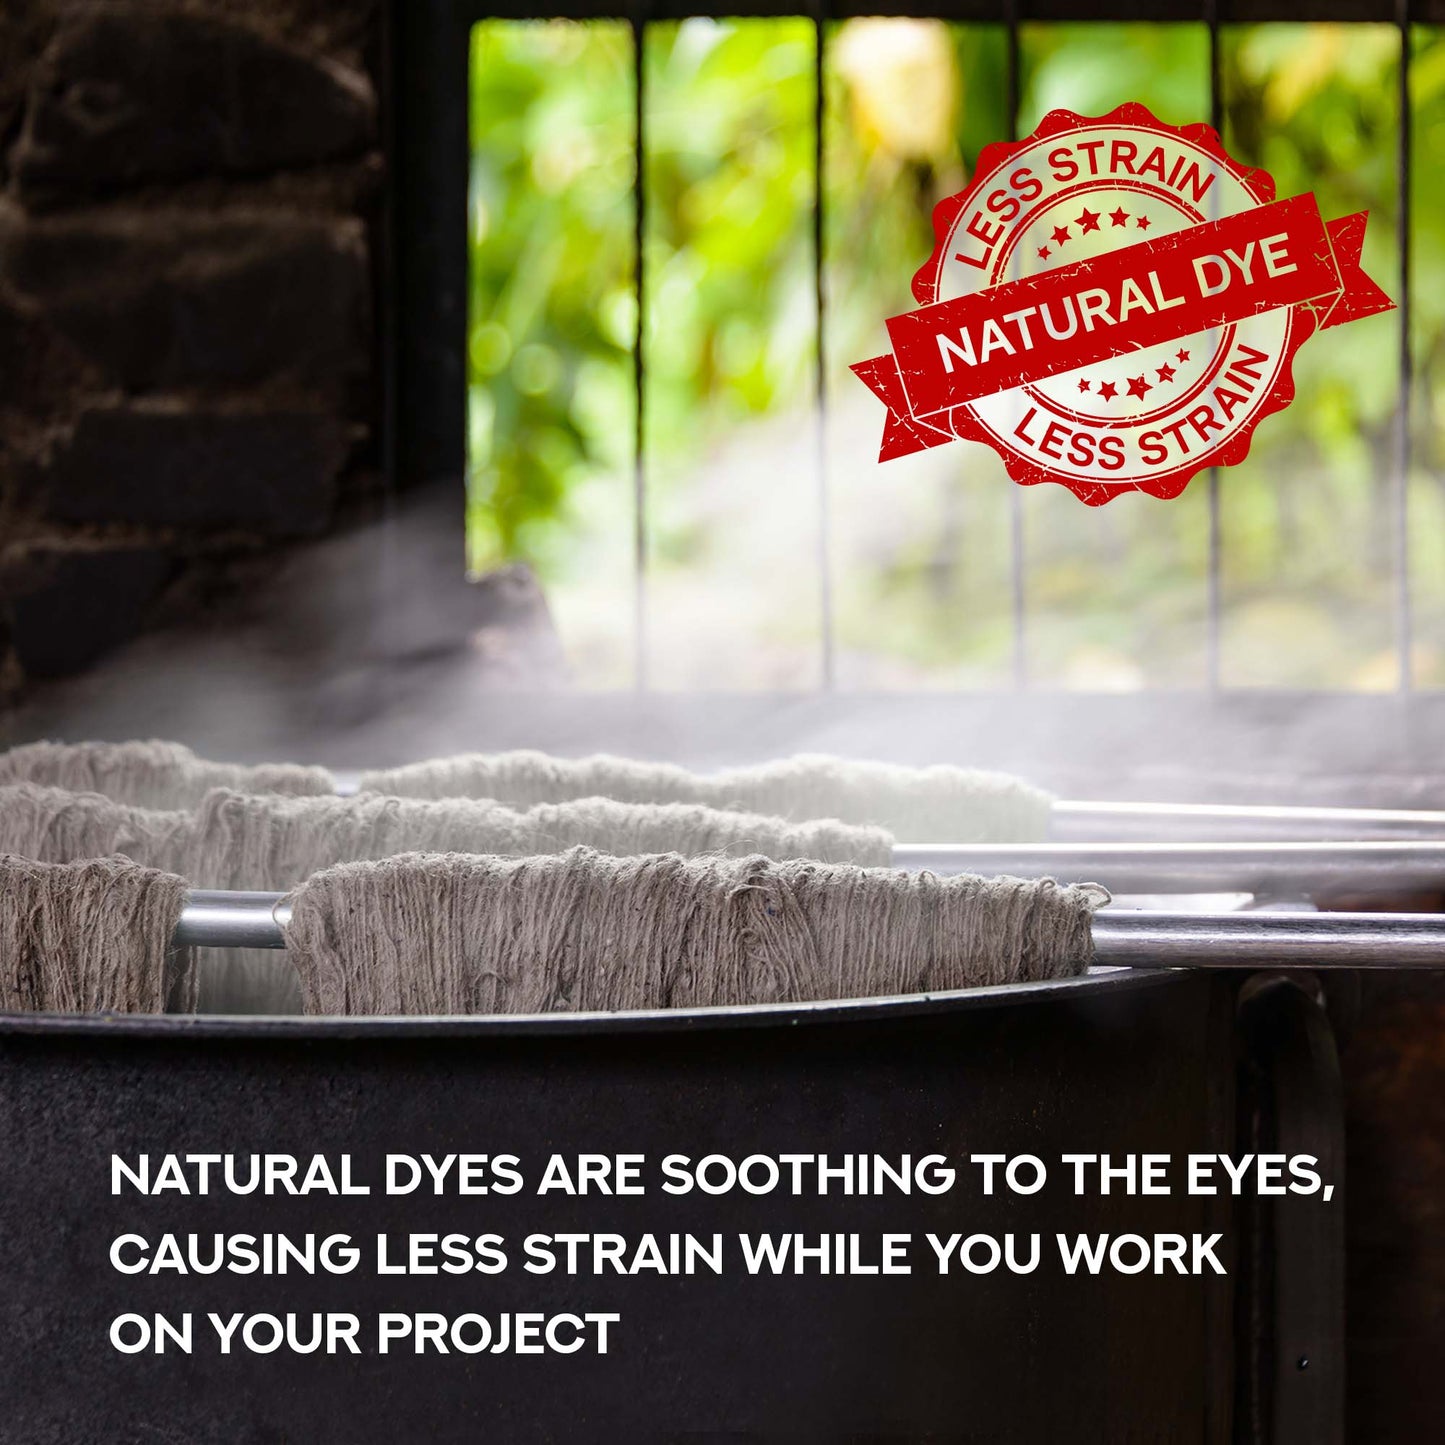 Natural dyes are soothing to the eyes, causing less strain while you work on your project.